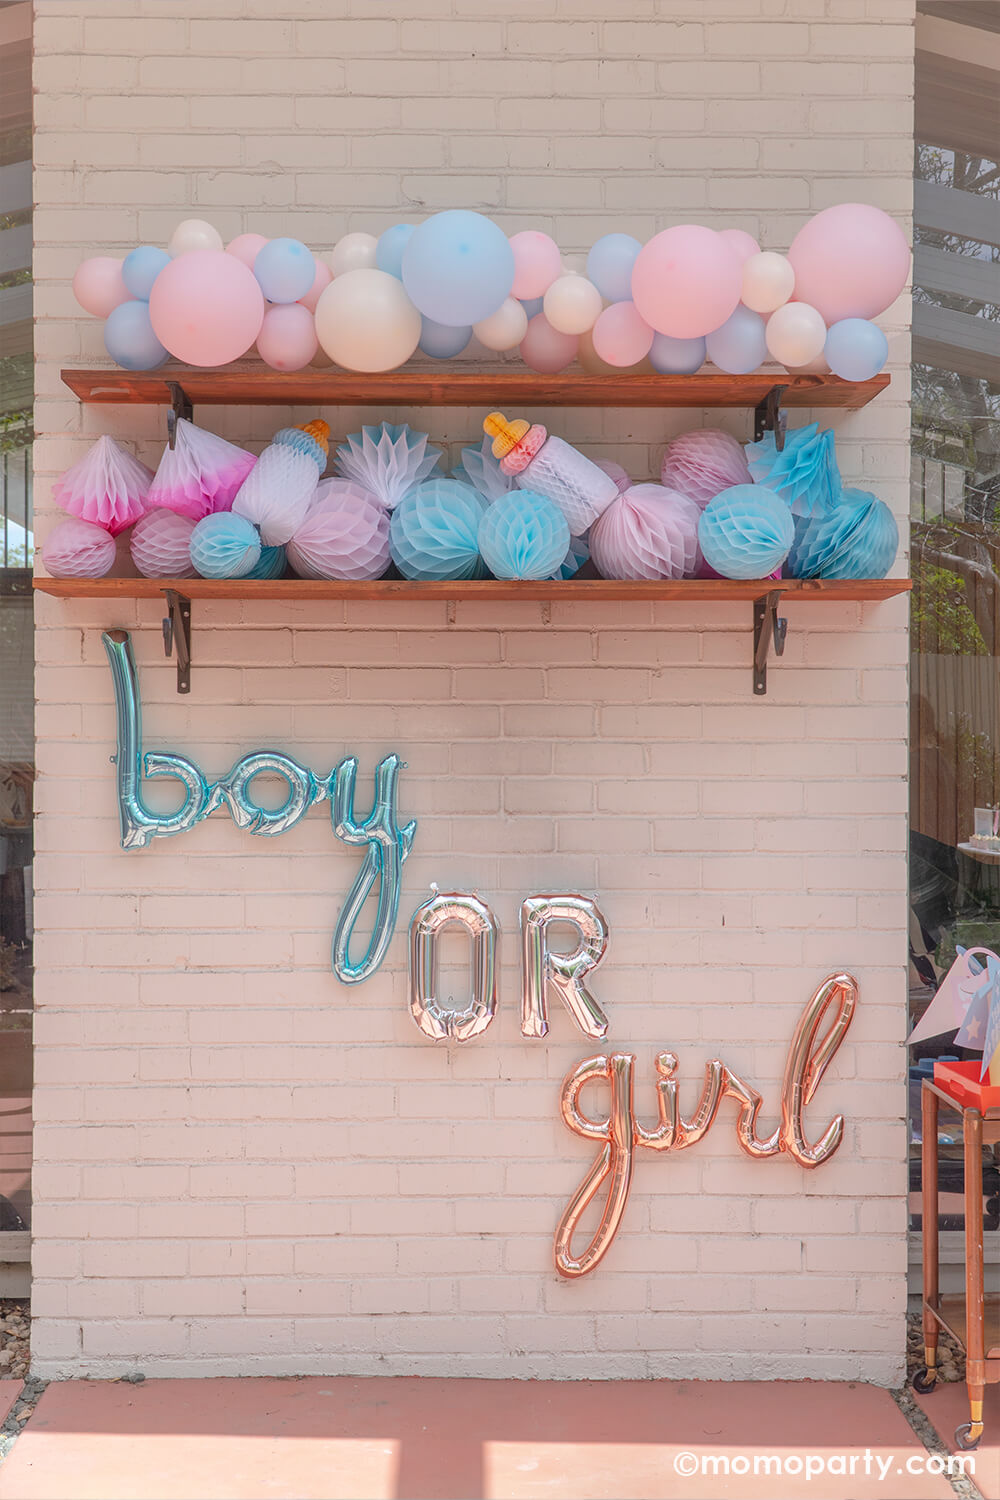 Boy or girl? A gender revel party by Momo Party, a brick wall decorated with boy or girl script foil letter balloons and a wall filled with honeycomb decorations in pink and blue and a boho pastel color balloon garland in baby pink and baby blue colors